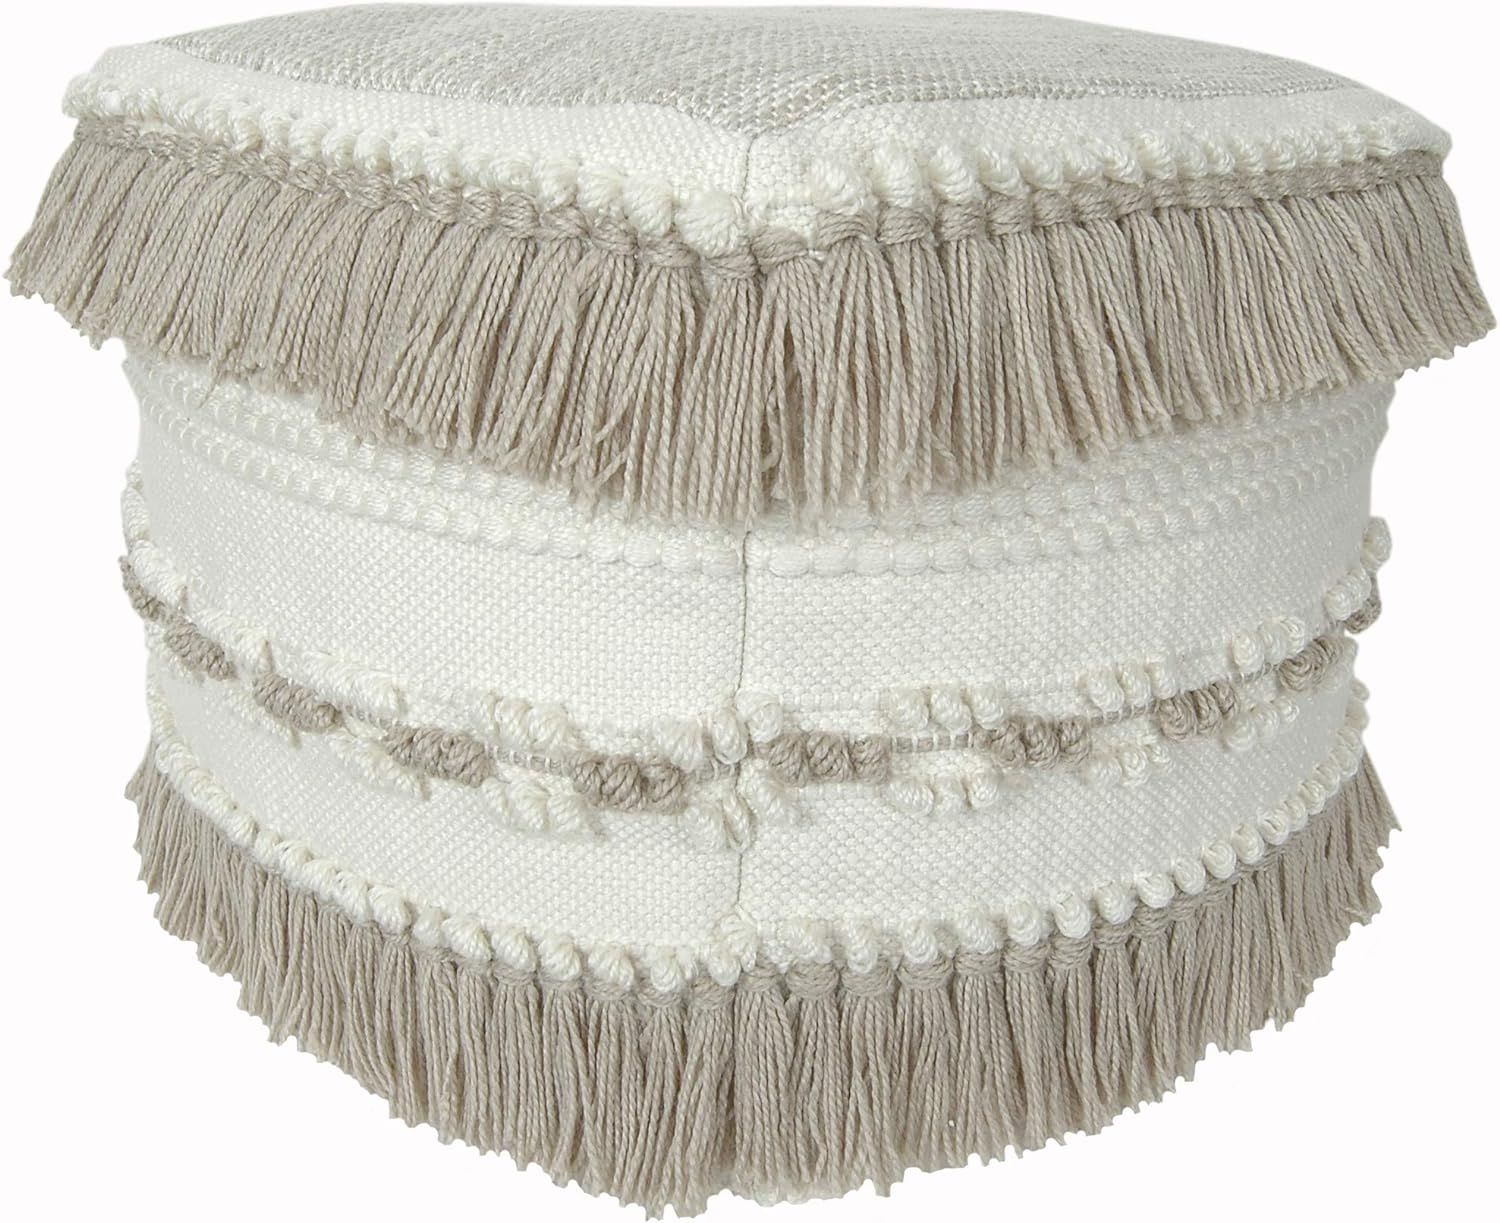 RULU 02278 Ottoman Outdoor/Indoor Pouf 18 inch x 18 inch x 18 inch Fringe, Natural | Amazon (US)